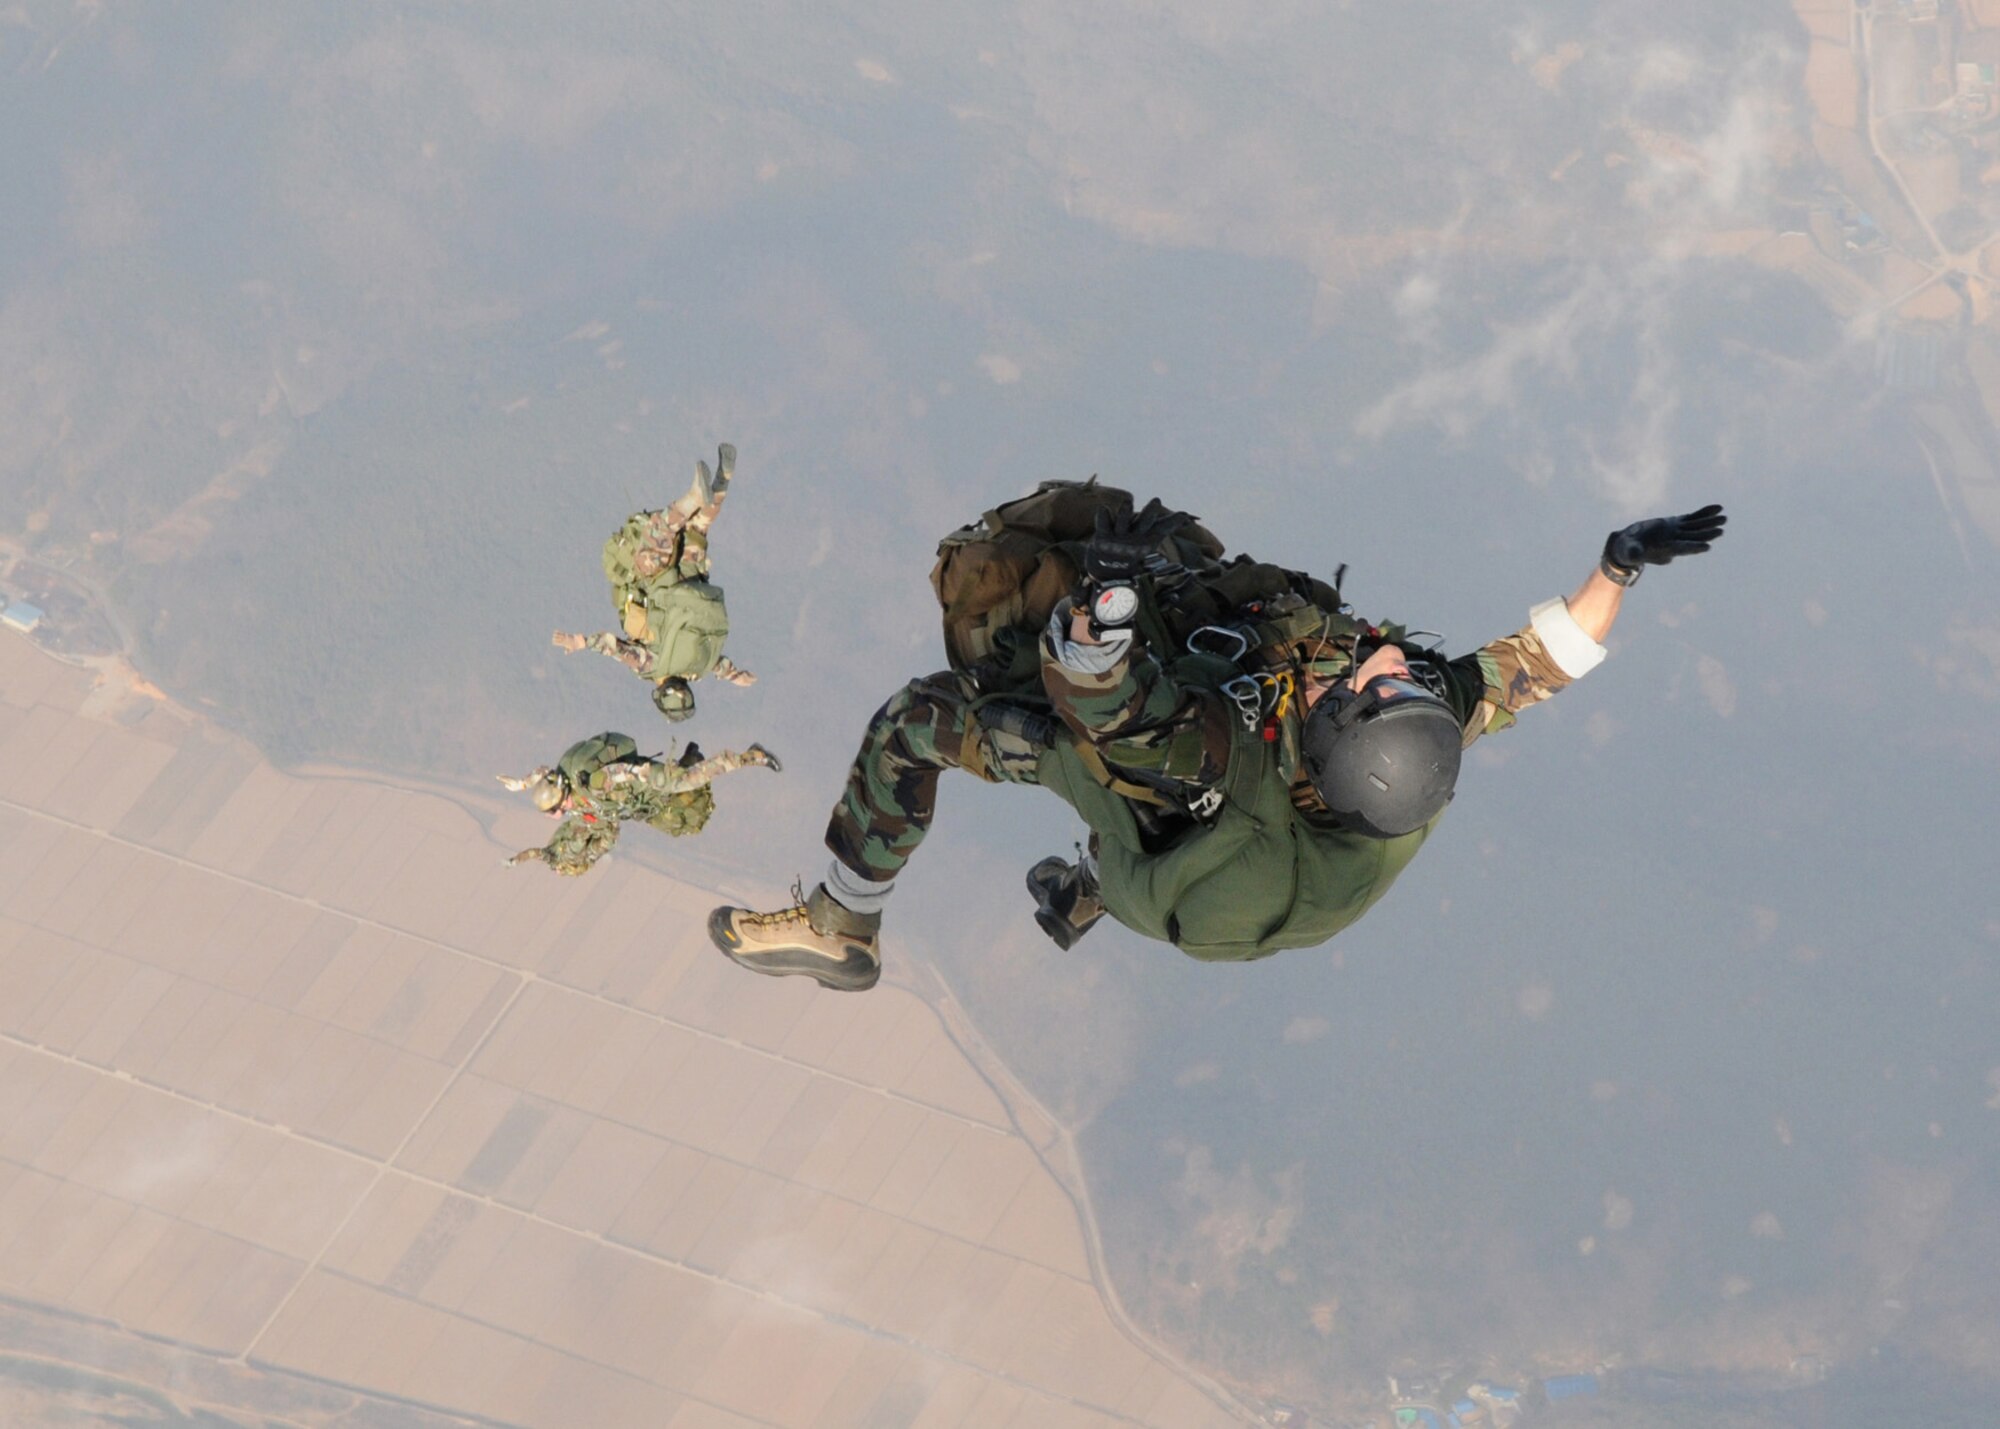 DAEGU AIR BASE, Republic of Korea -- Members from the 320th Special Tactics Squadron freefall after jumping from the back of a 1st Special Operations Squadron MC-130H Combat Talon II here March 19. The high altitude, low opening jump training is in preparation for the group's annual operational readiness exercise which affords unit members an opportunity to practice wartime skills necessary for their ability to survive and operate. The 353rd Special Operations Group is the focal point for all U.S. Air Force special operations activities throughout the U.S. Pacific Command theater. (U.S. Air Force photo by Tech. Sgt. Aaron Cram)
